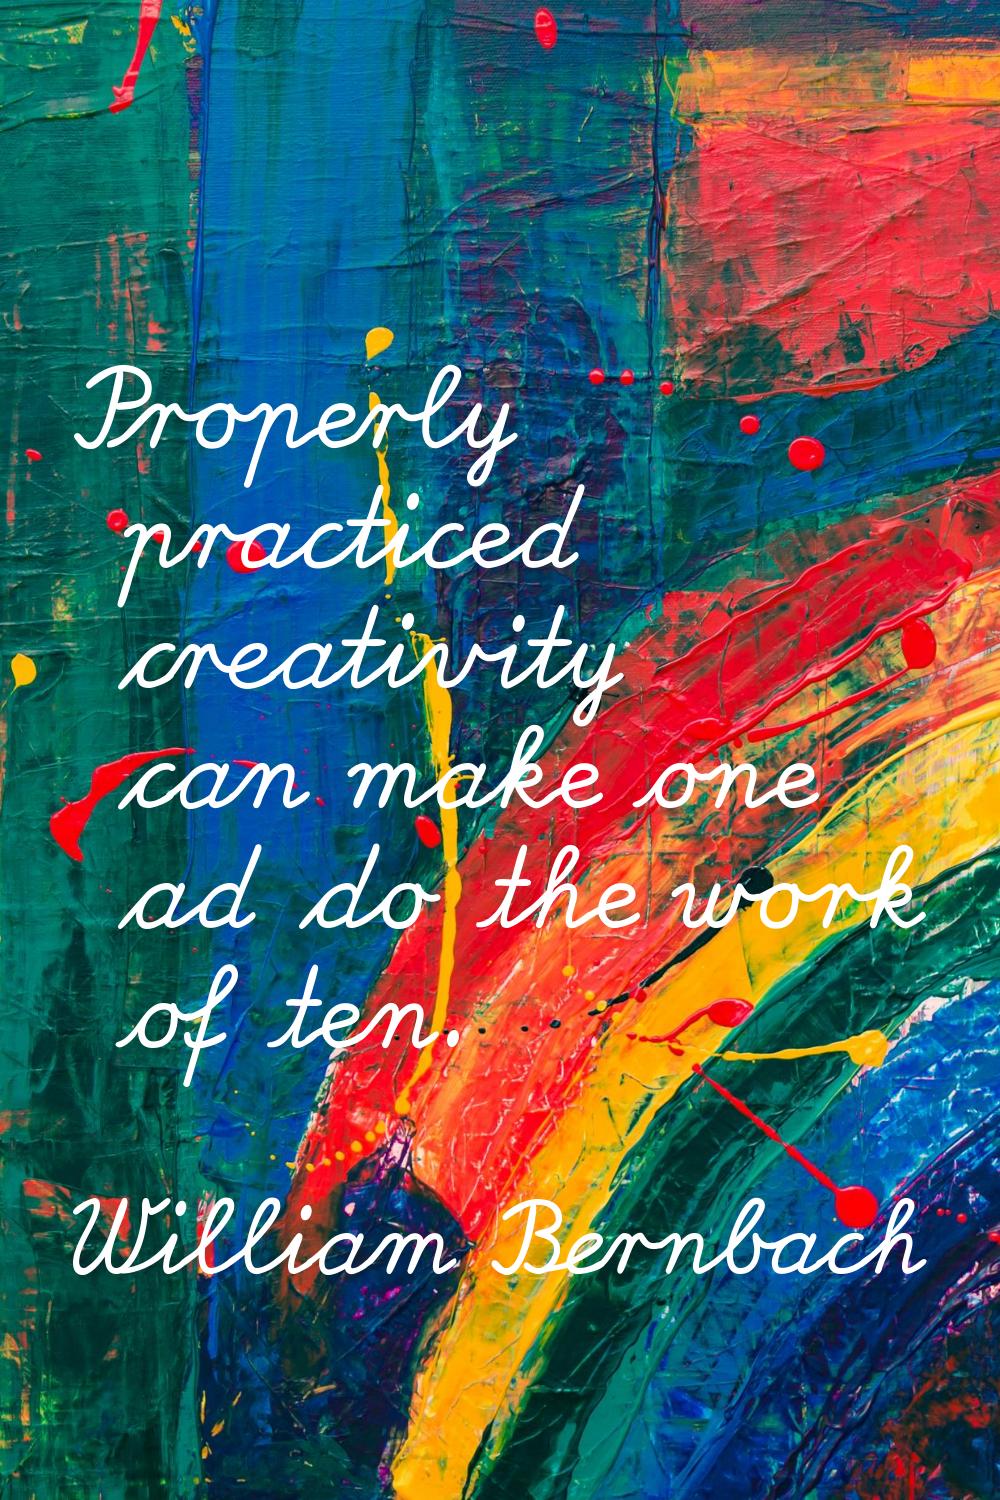 Properly practiced creativity can make one ad do the work of ten.